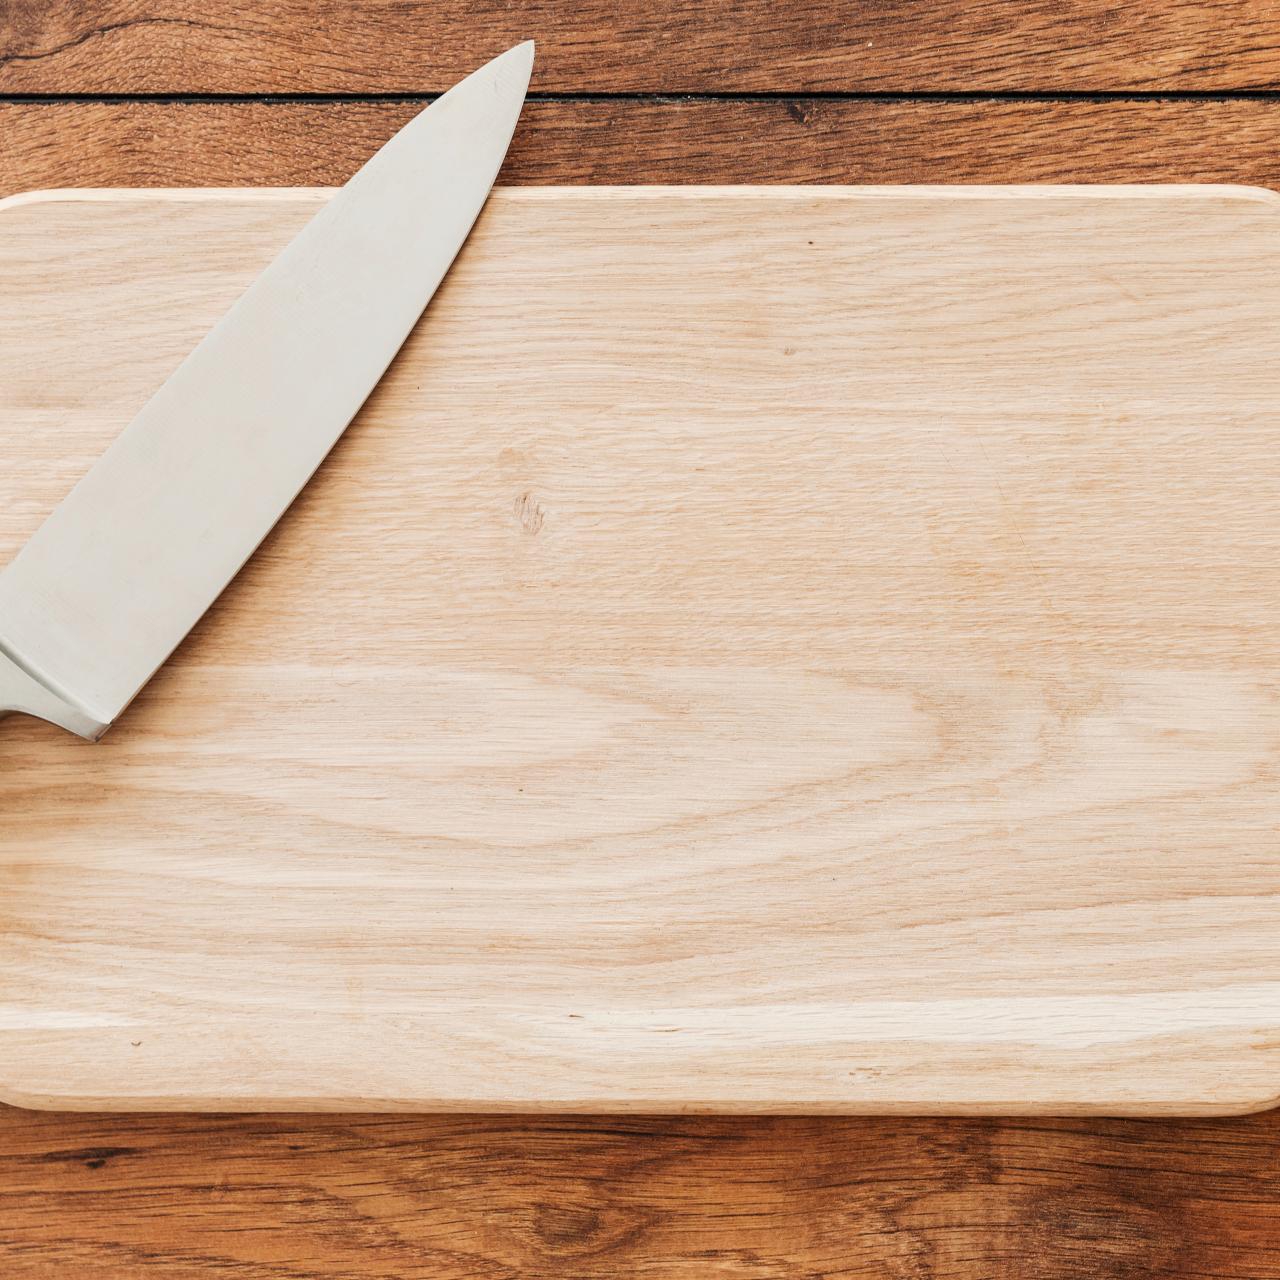 7 Horrible Things You're Doing To Your Cutting Boards